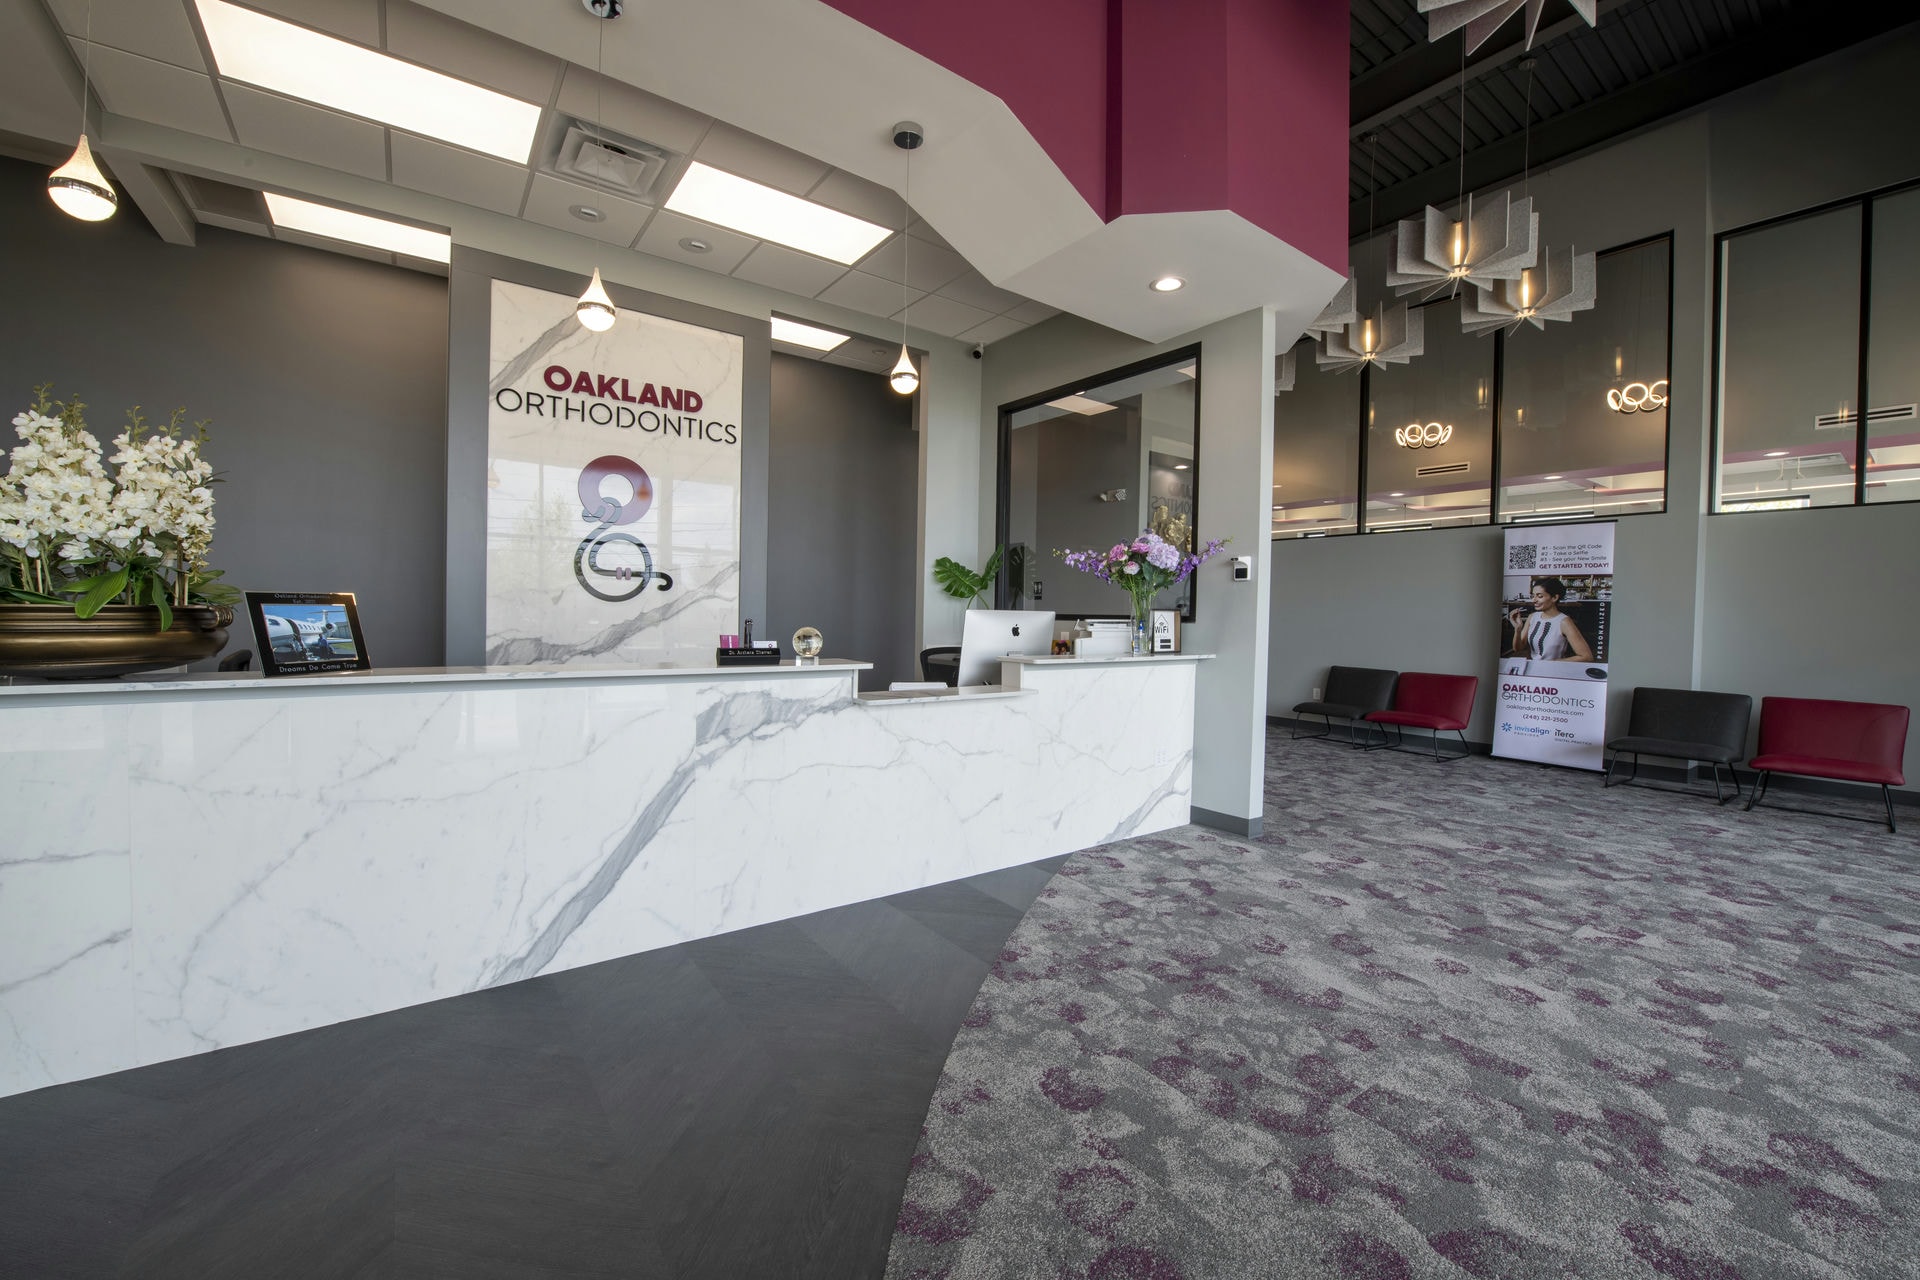 The large, open lobby of Oakland Orthodontics features chandelier light fixtures and a modern gray and marble color scheme.